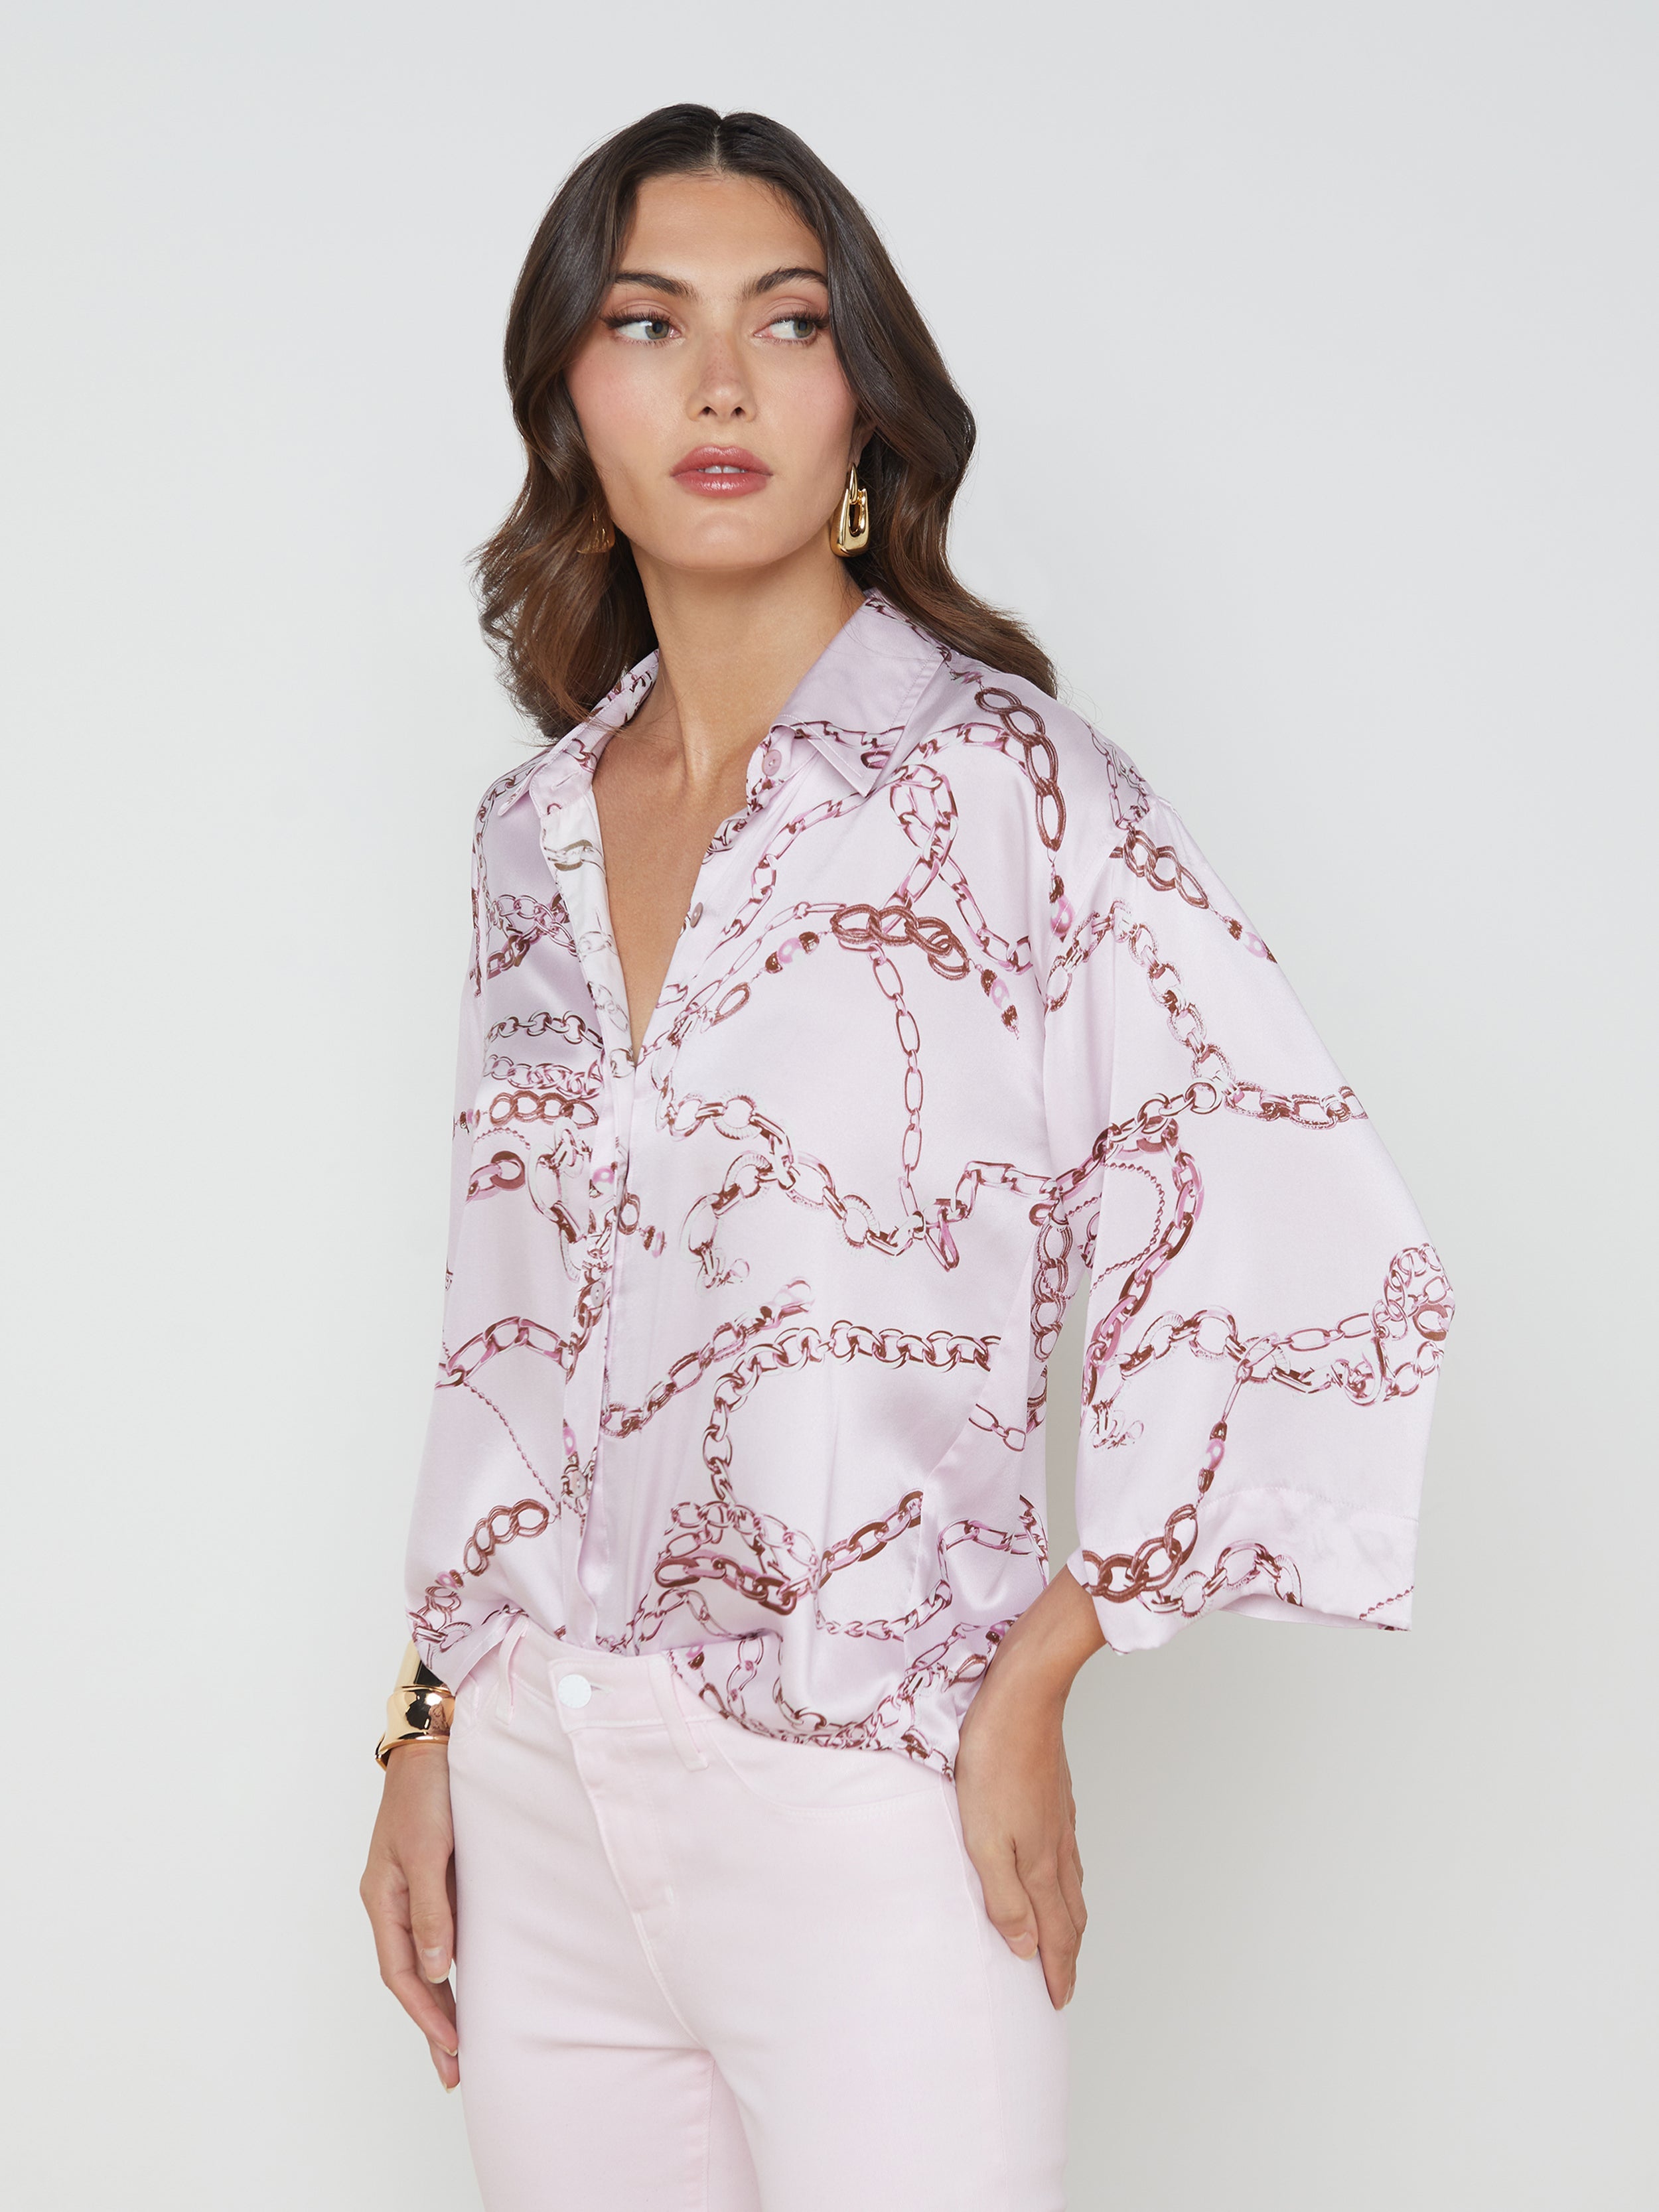 Patrice Short Sleeve Blouse in Lilac Snow Multi Sketch Chain